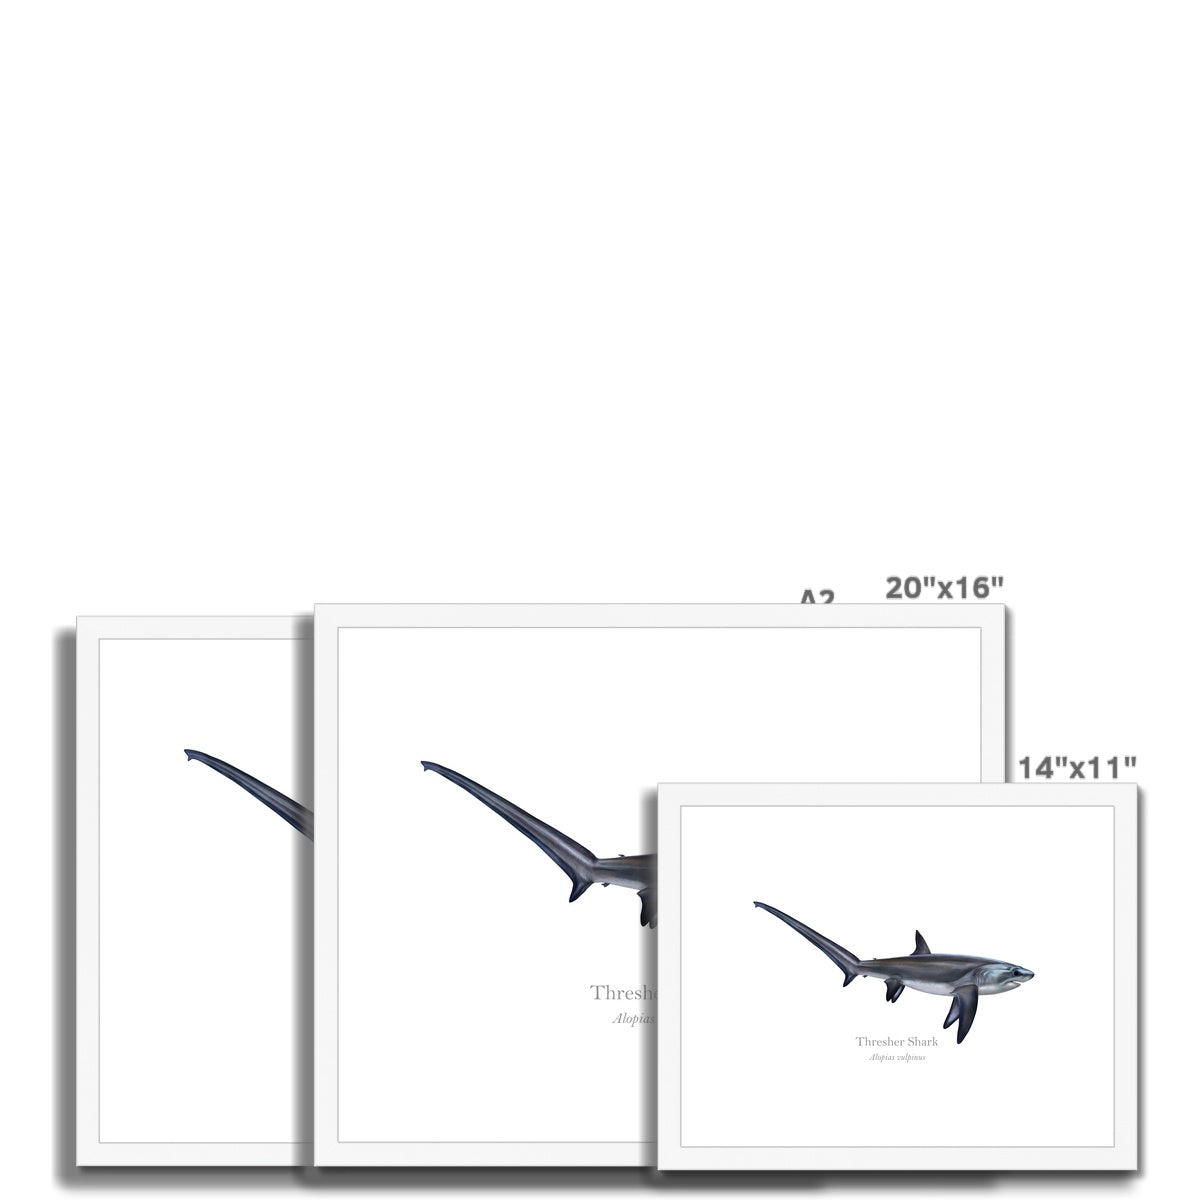 Thresher Shark - Framed & Mounted Print - With Scientific Name